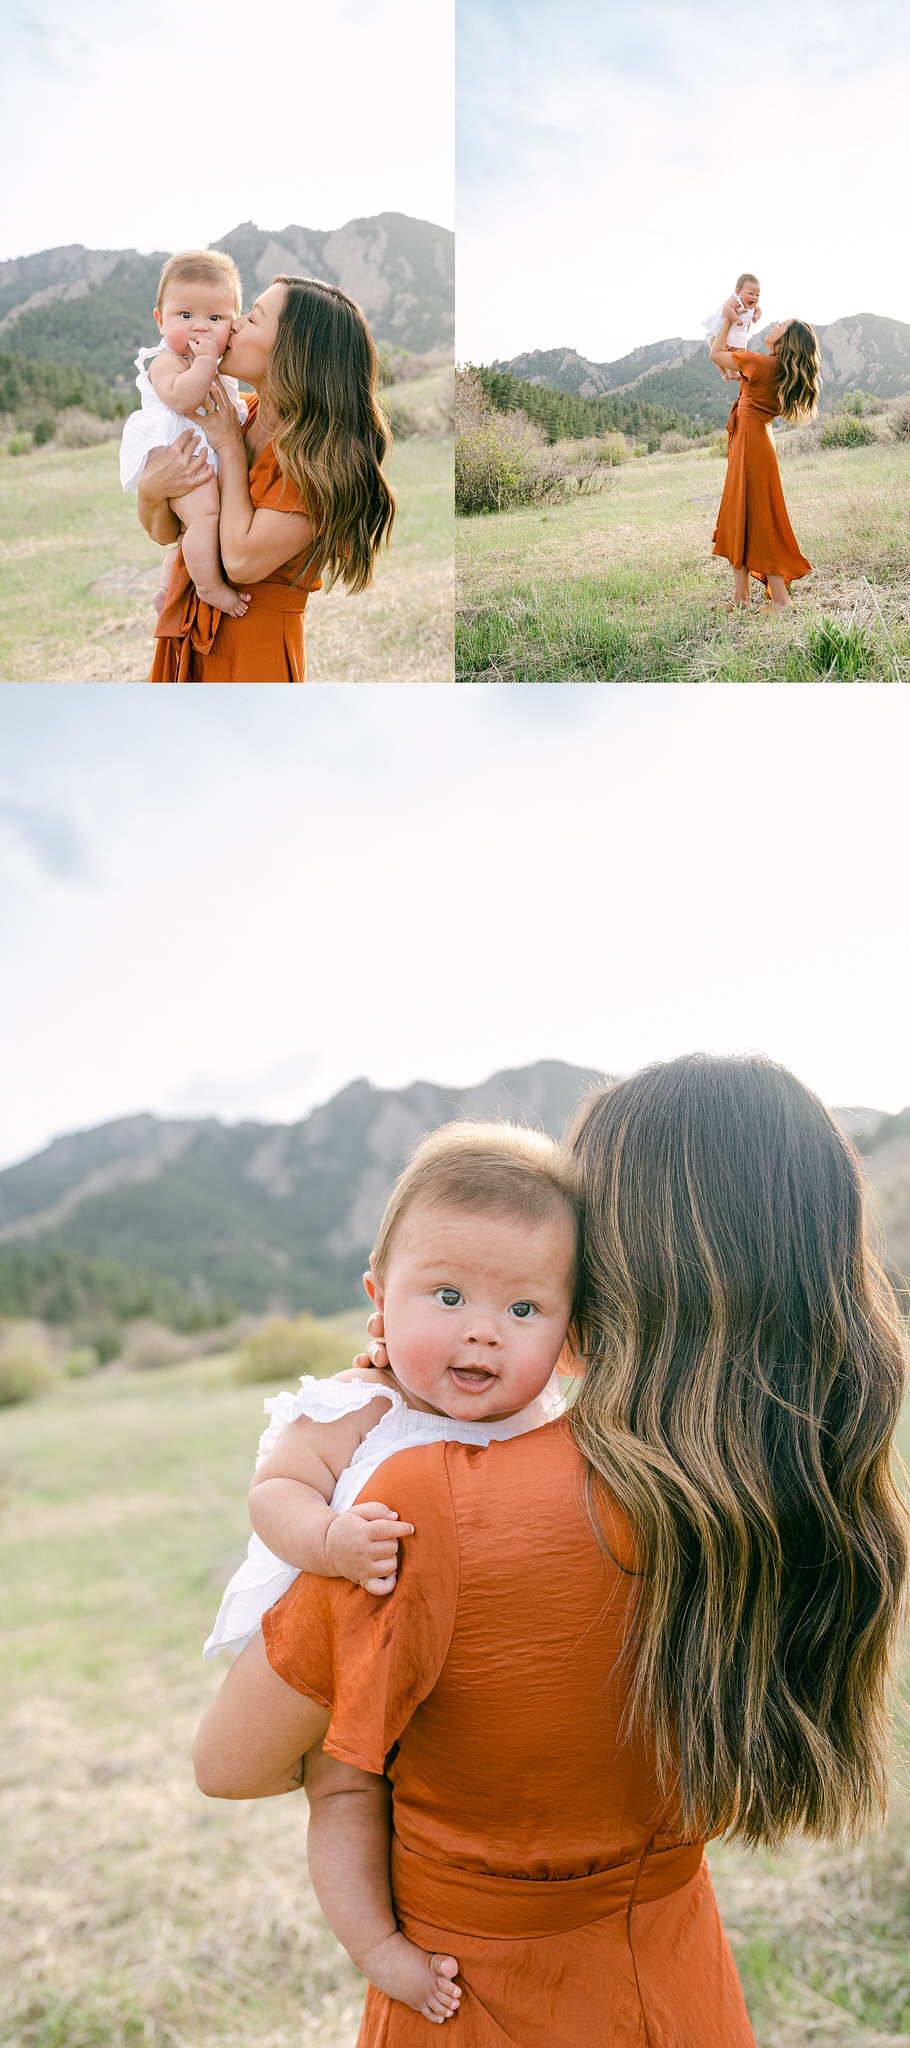 A young mother wearing a orange dress with her six month baby during a photo session in Boulder, Colorado with mountains in the background.